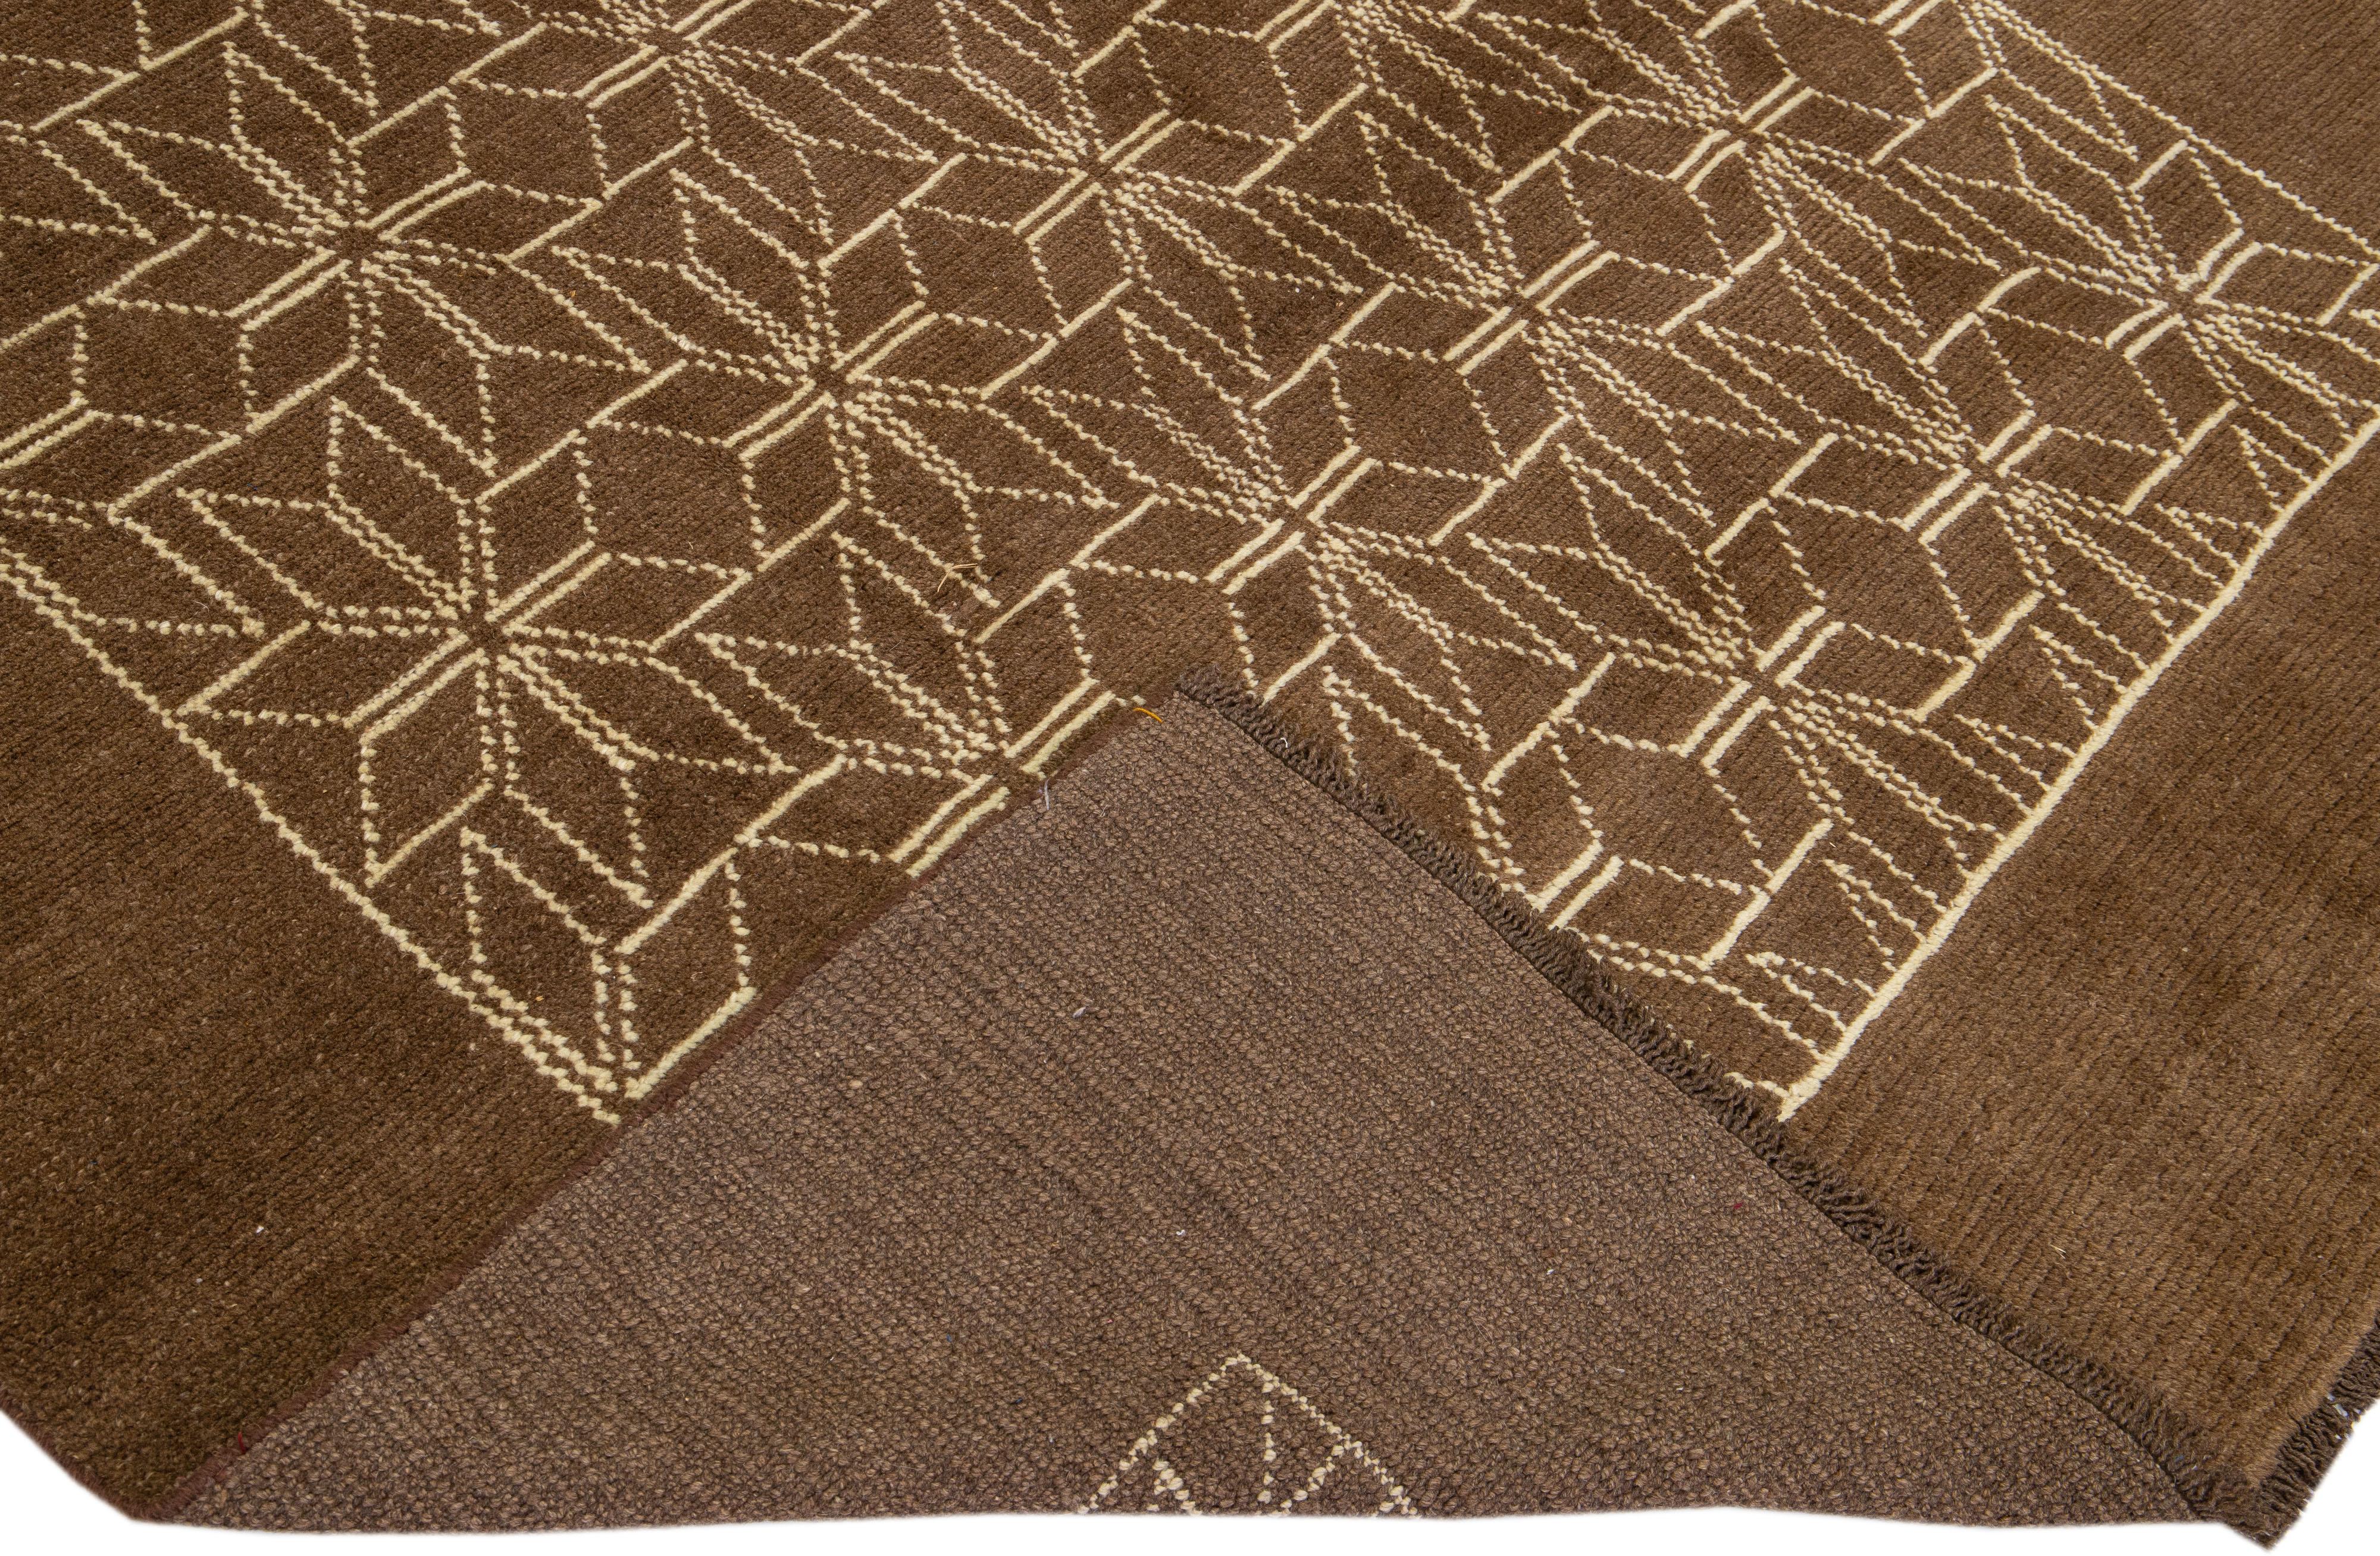 This Beautiful Moroccan-style handmade wool rug makes part of our Northwest collection and features a brown color field and beige accents in a gorgeous geometric tribal design.

This rug measures: 6'10